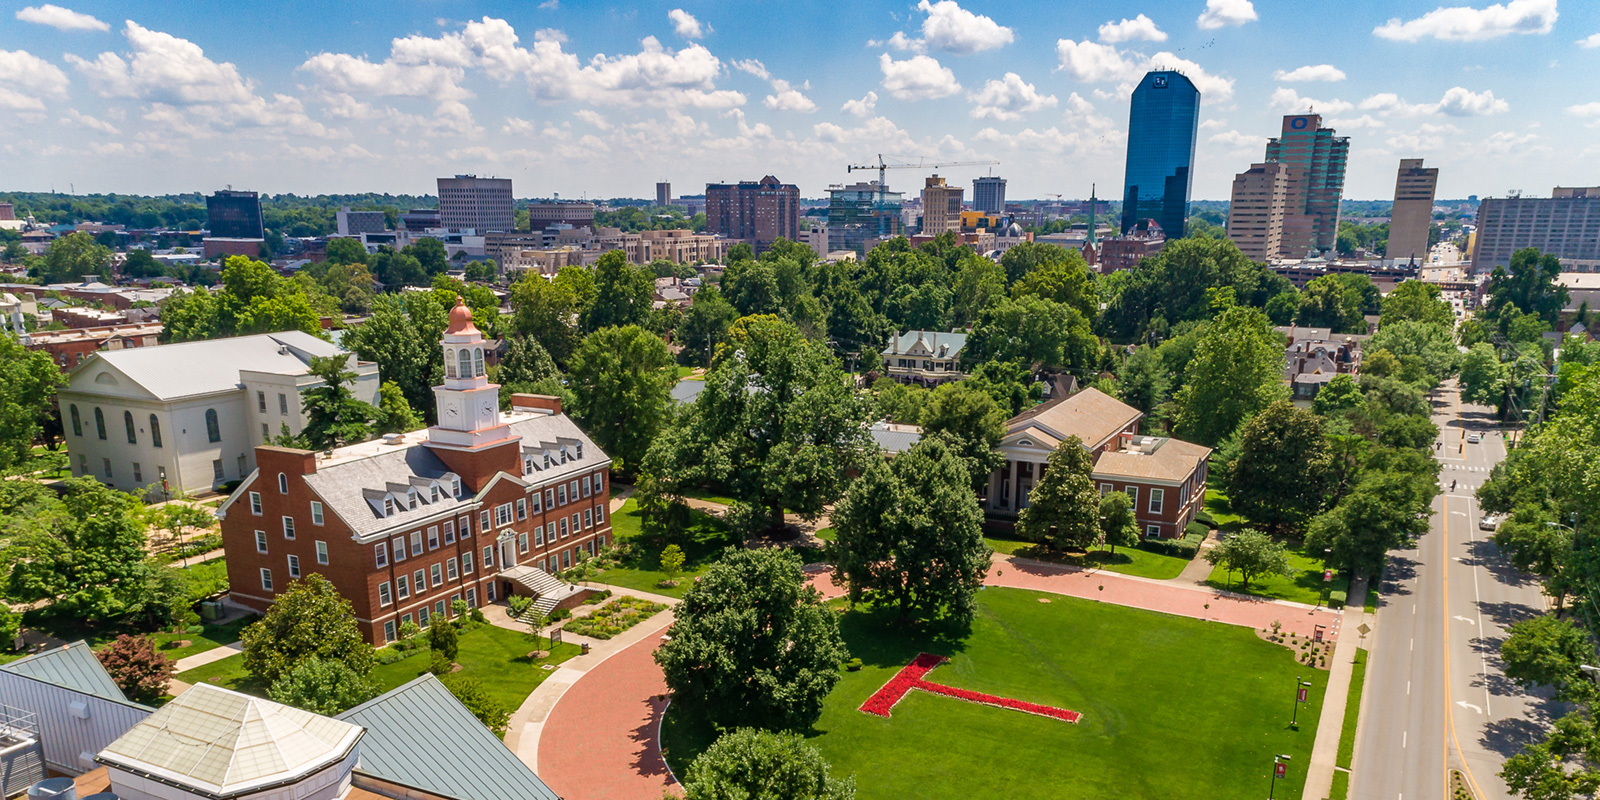 Translvania Univdrsity viewed from above with the Lexington skyline in the background